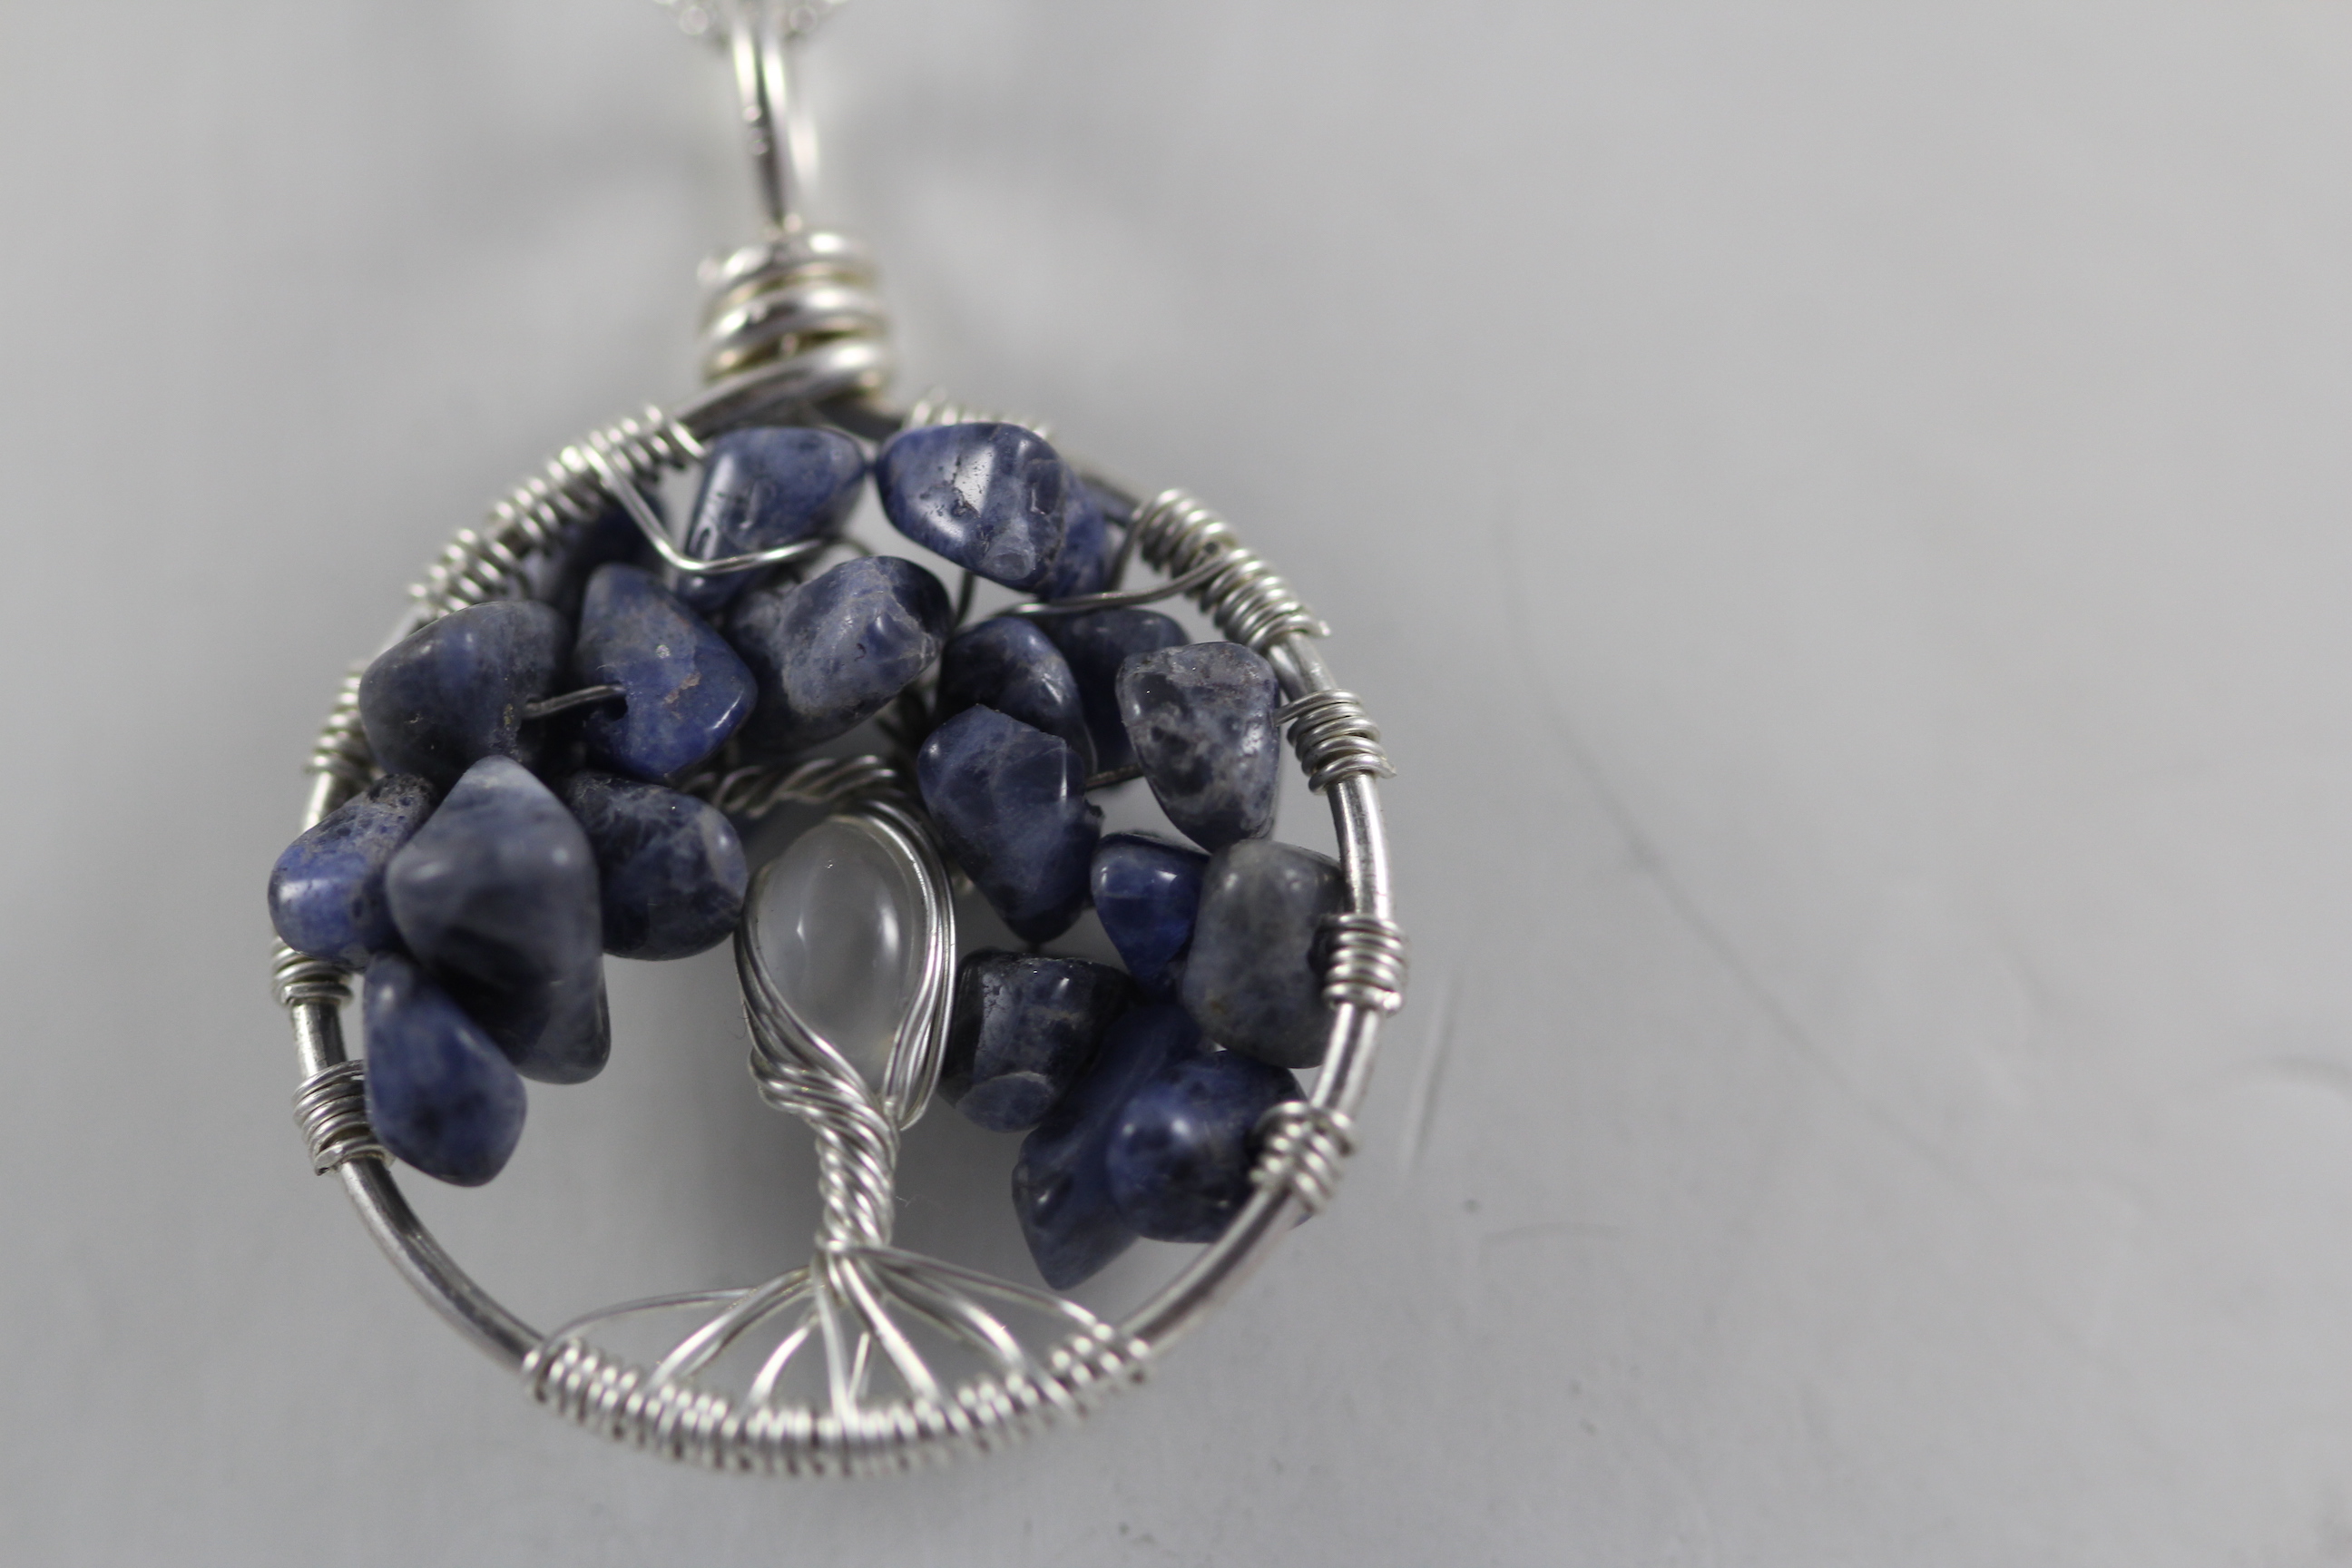 Creative Expressions - Tree of Life Pendant - Sodalite - Moonstone - Silver Wire